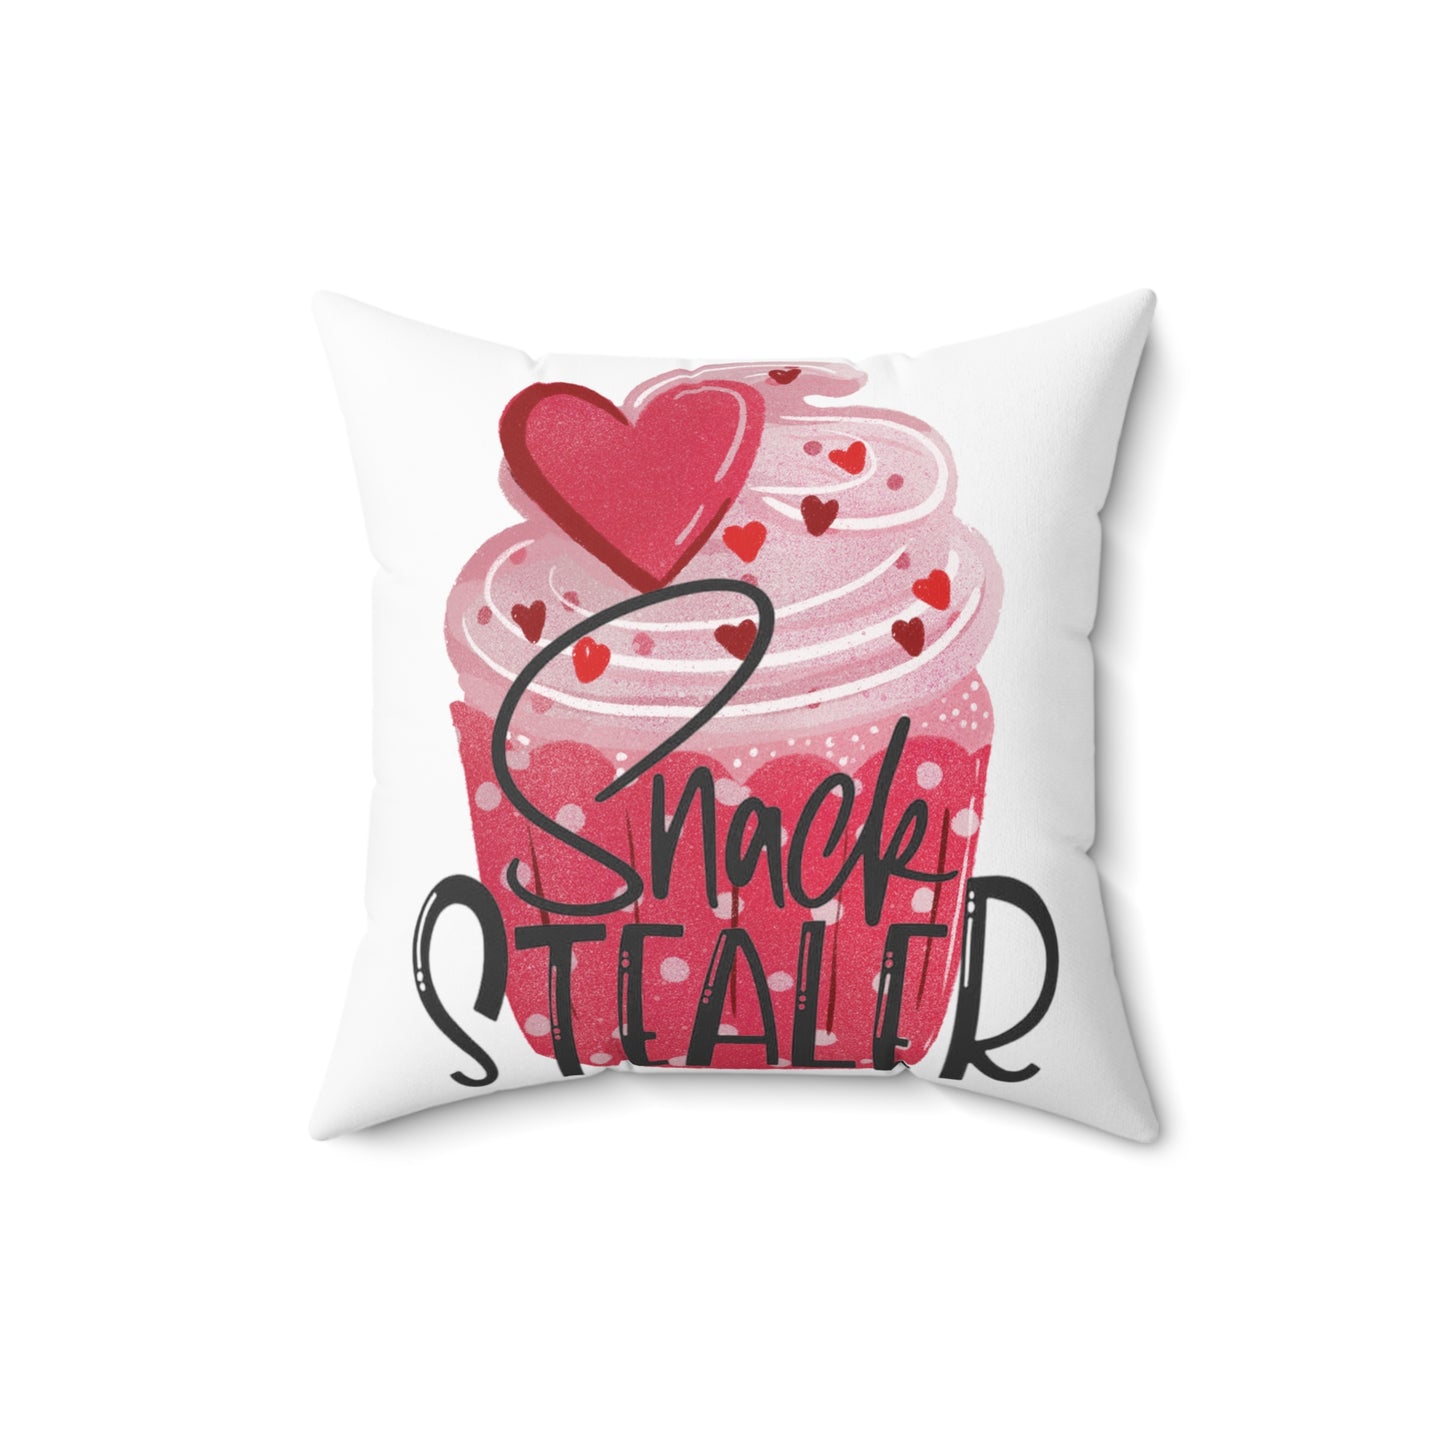 Cupcake Snack Stealer Square Pillow